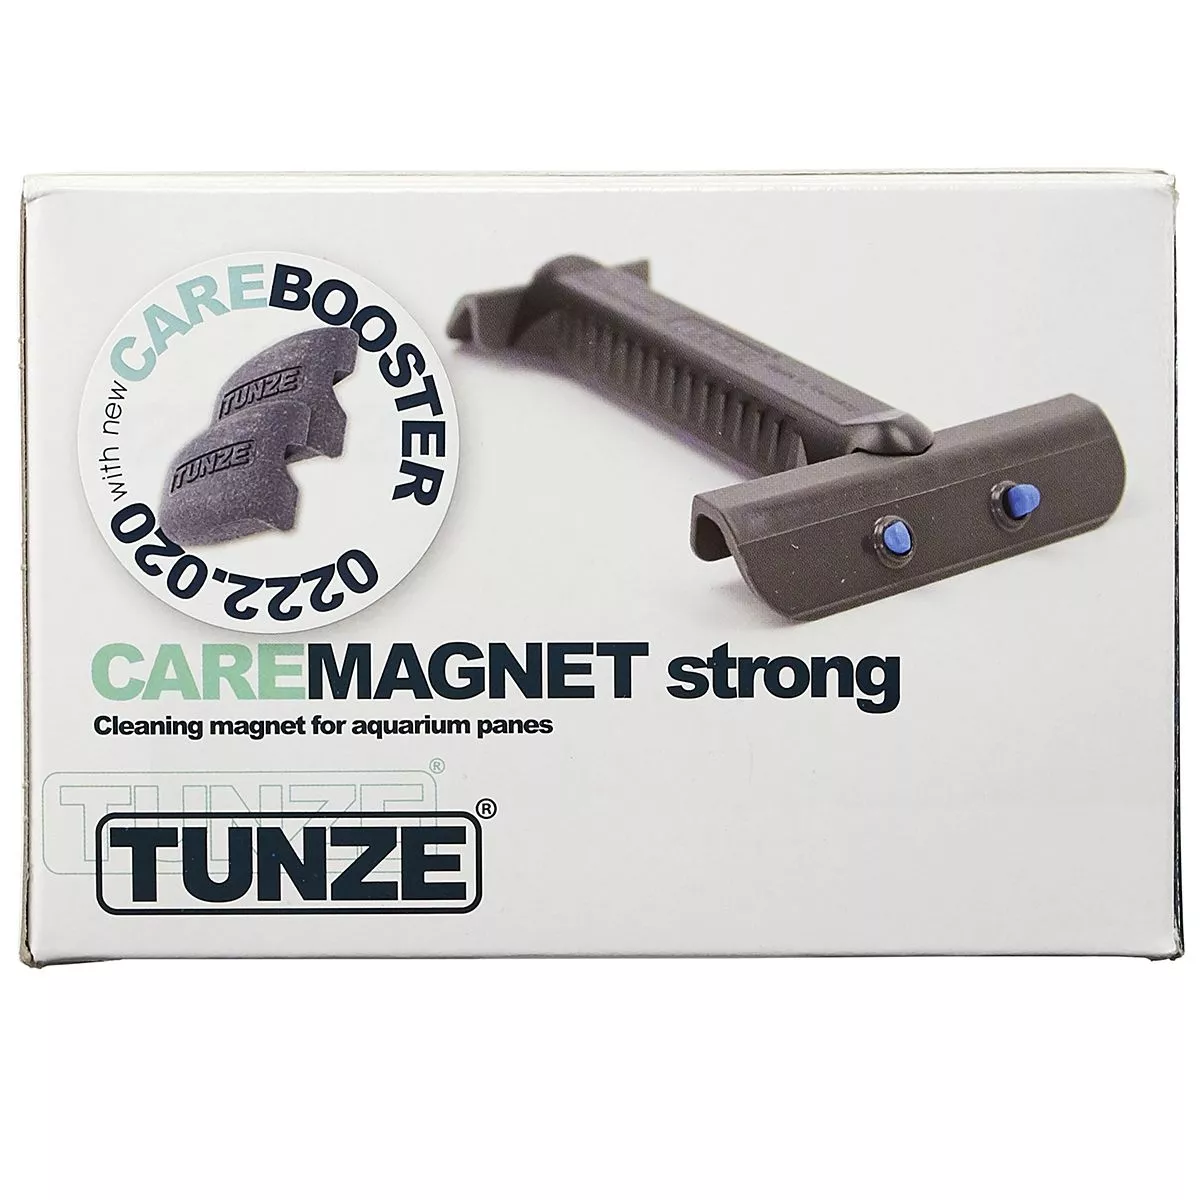 Tunze Care Magnet Strong